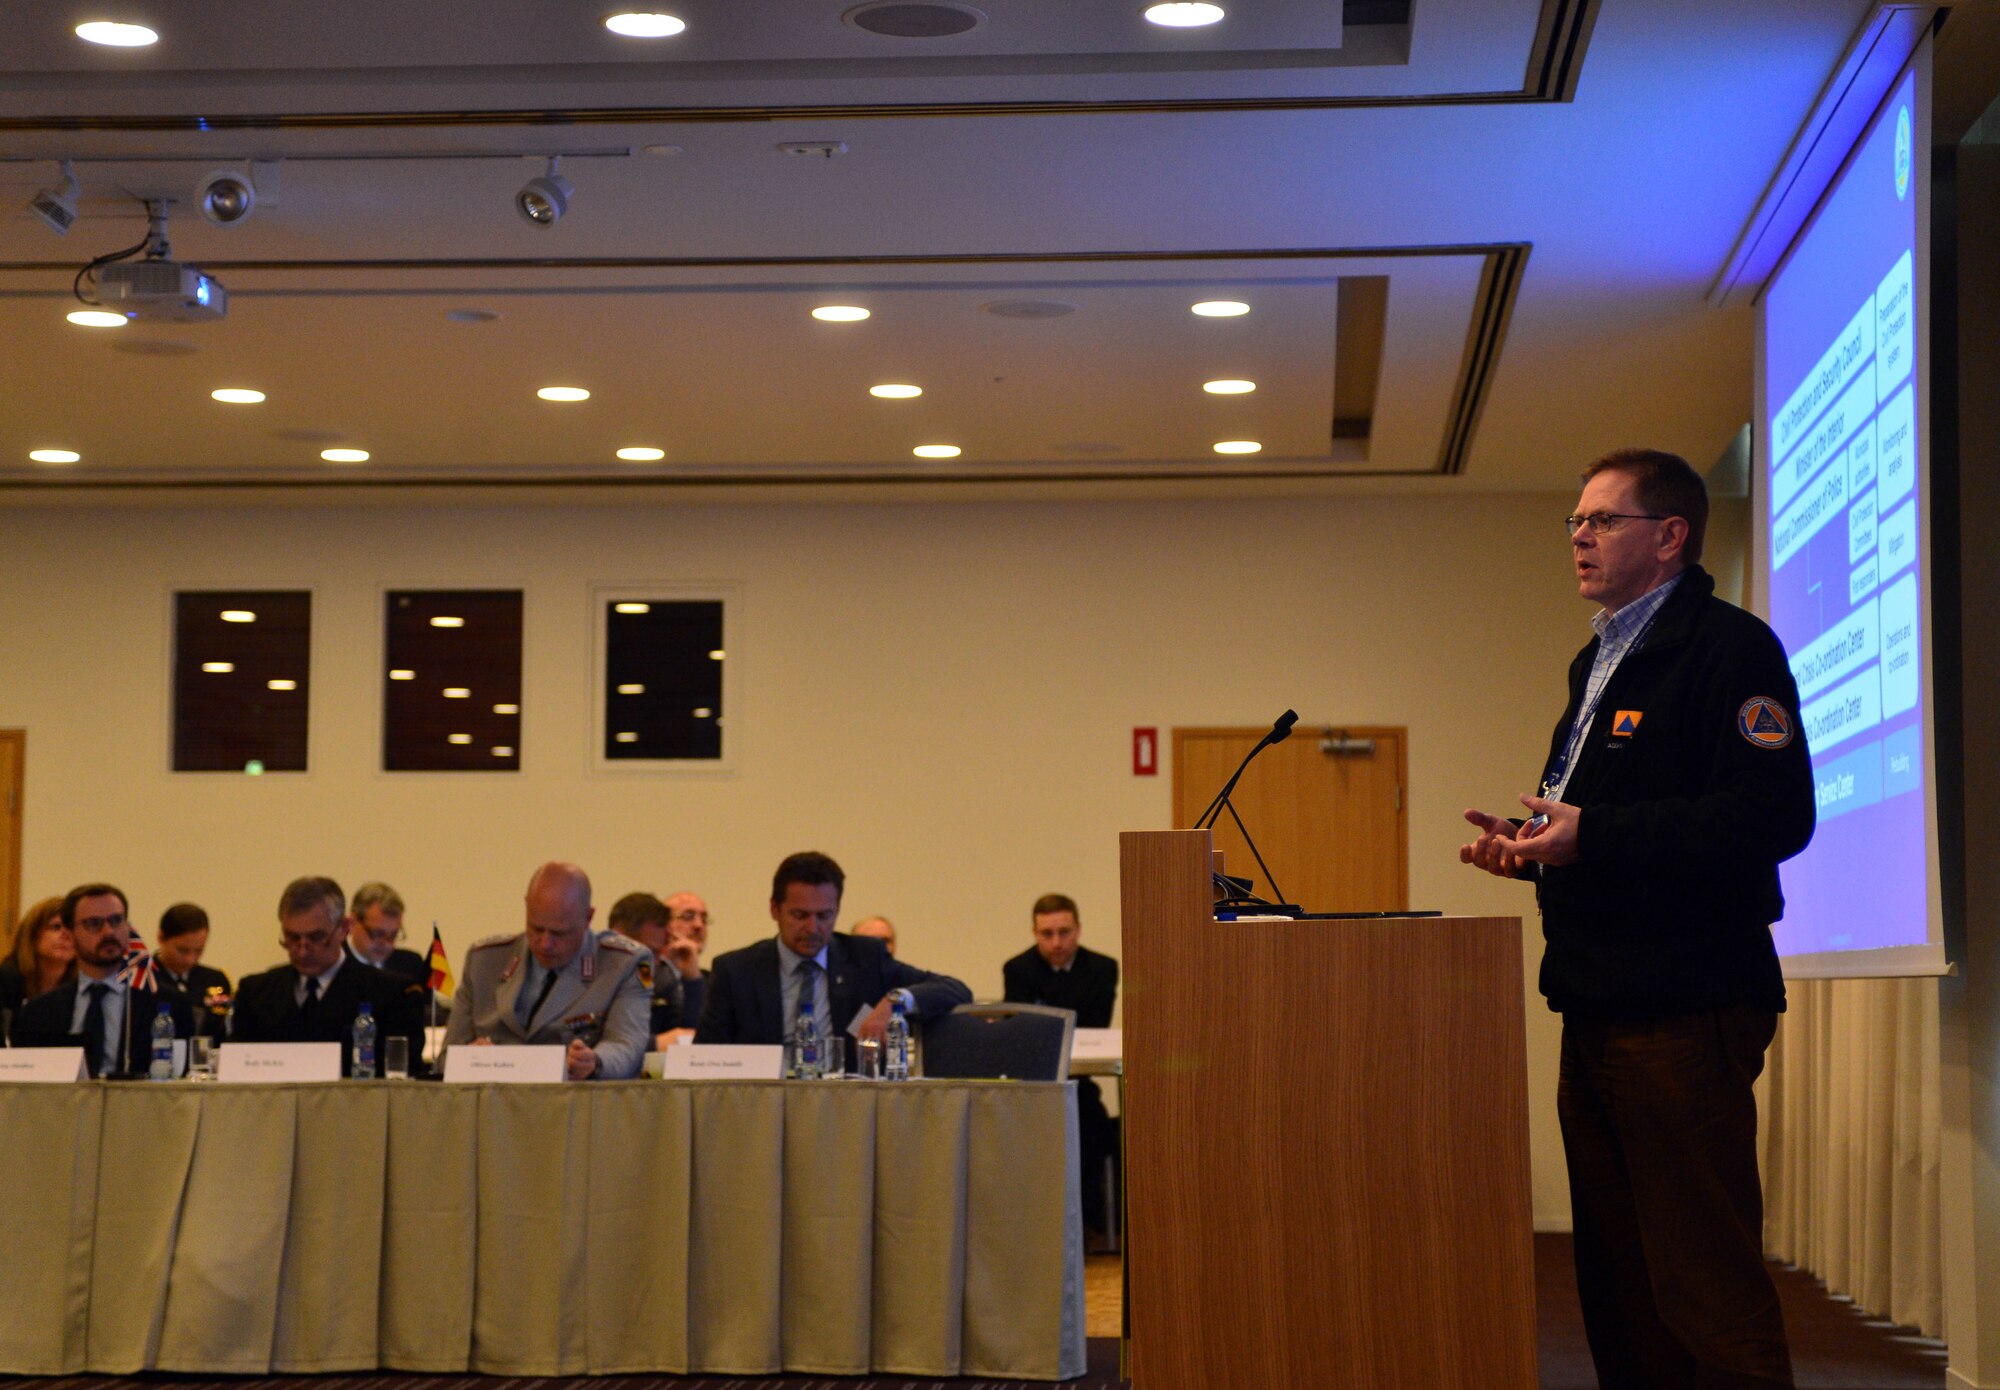 A representative of the Icelandic Civil Protection and Security Council gives a presentation to attendees of the Arctic Security Forces Roundtable, May 12, 2015 in Reykjavik, Iceland. Representatives from 11 nations across Europe and North America met for the ASFR in order to promote regional understanding and enhance multilateral security operations within the Arctic area. (U.S. Air Force photo by 2nd Lt. Meredith Mulvihill/Released)